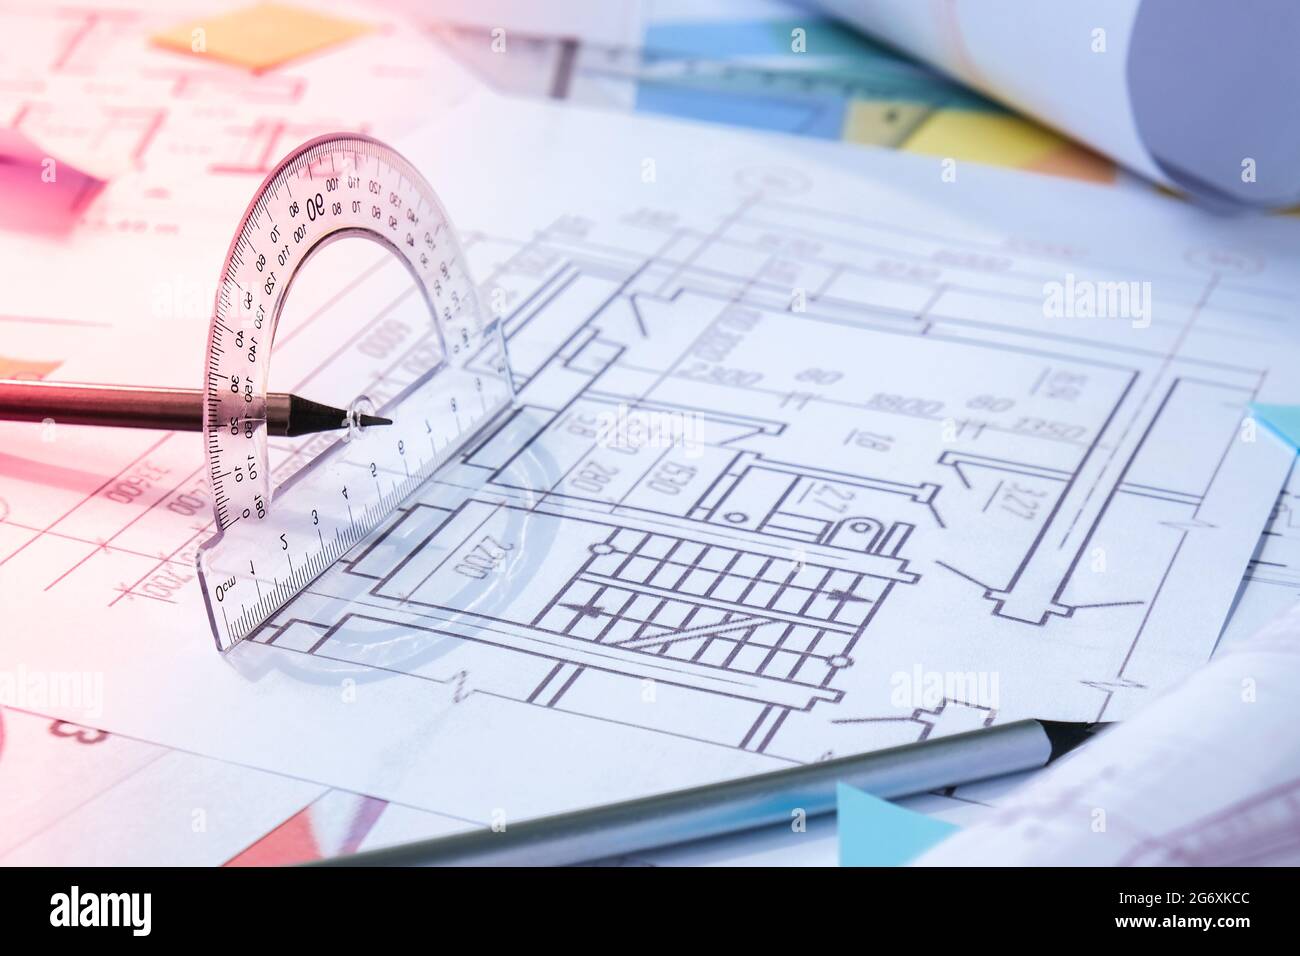 https://c8.alamy.com/comp/2G6XKCC/a-pencil-with-a-protractor-architectural-project-drawings-with-tools-architects-workplace-engineering-interior-designers-working-table-2G6XKCC.jpg